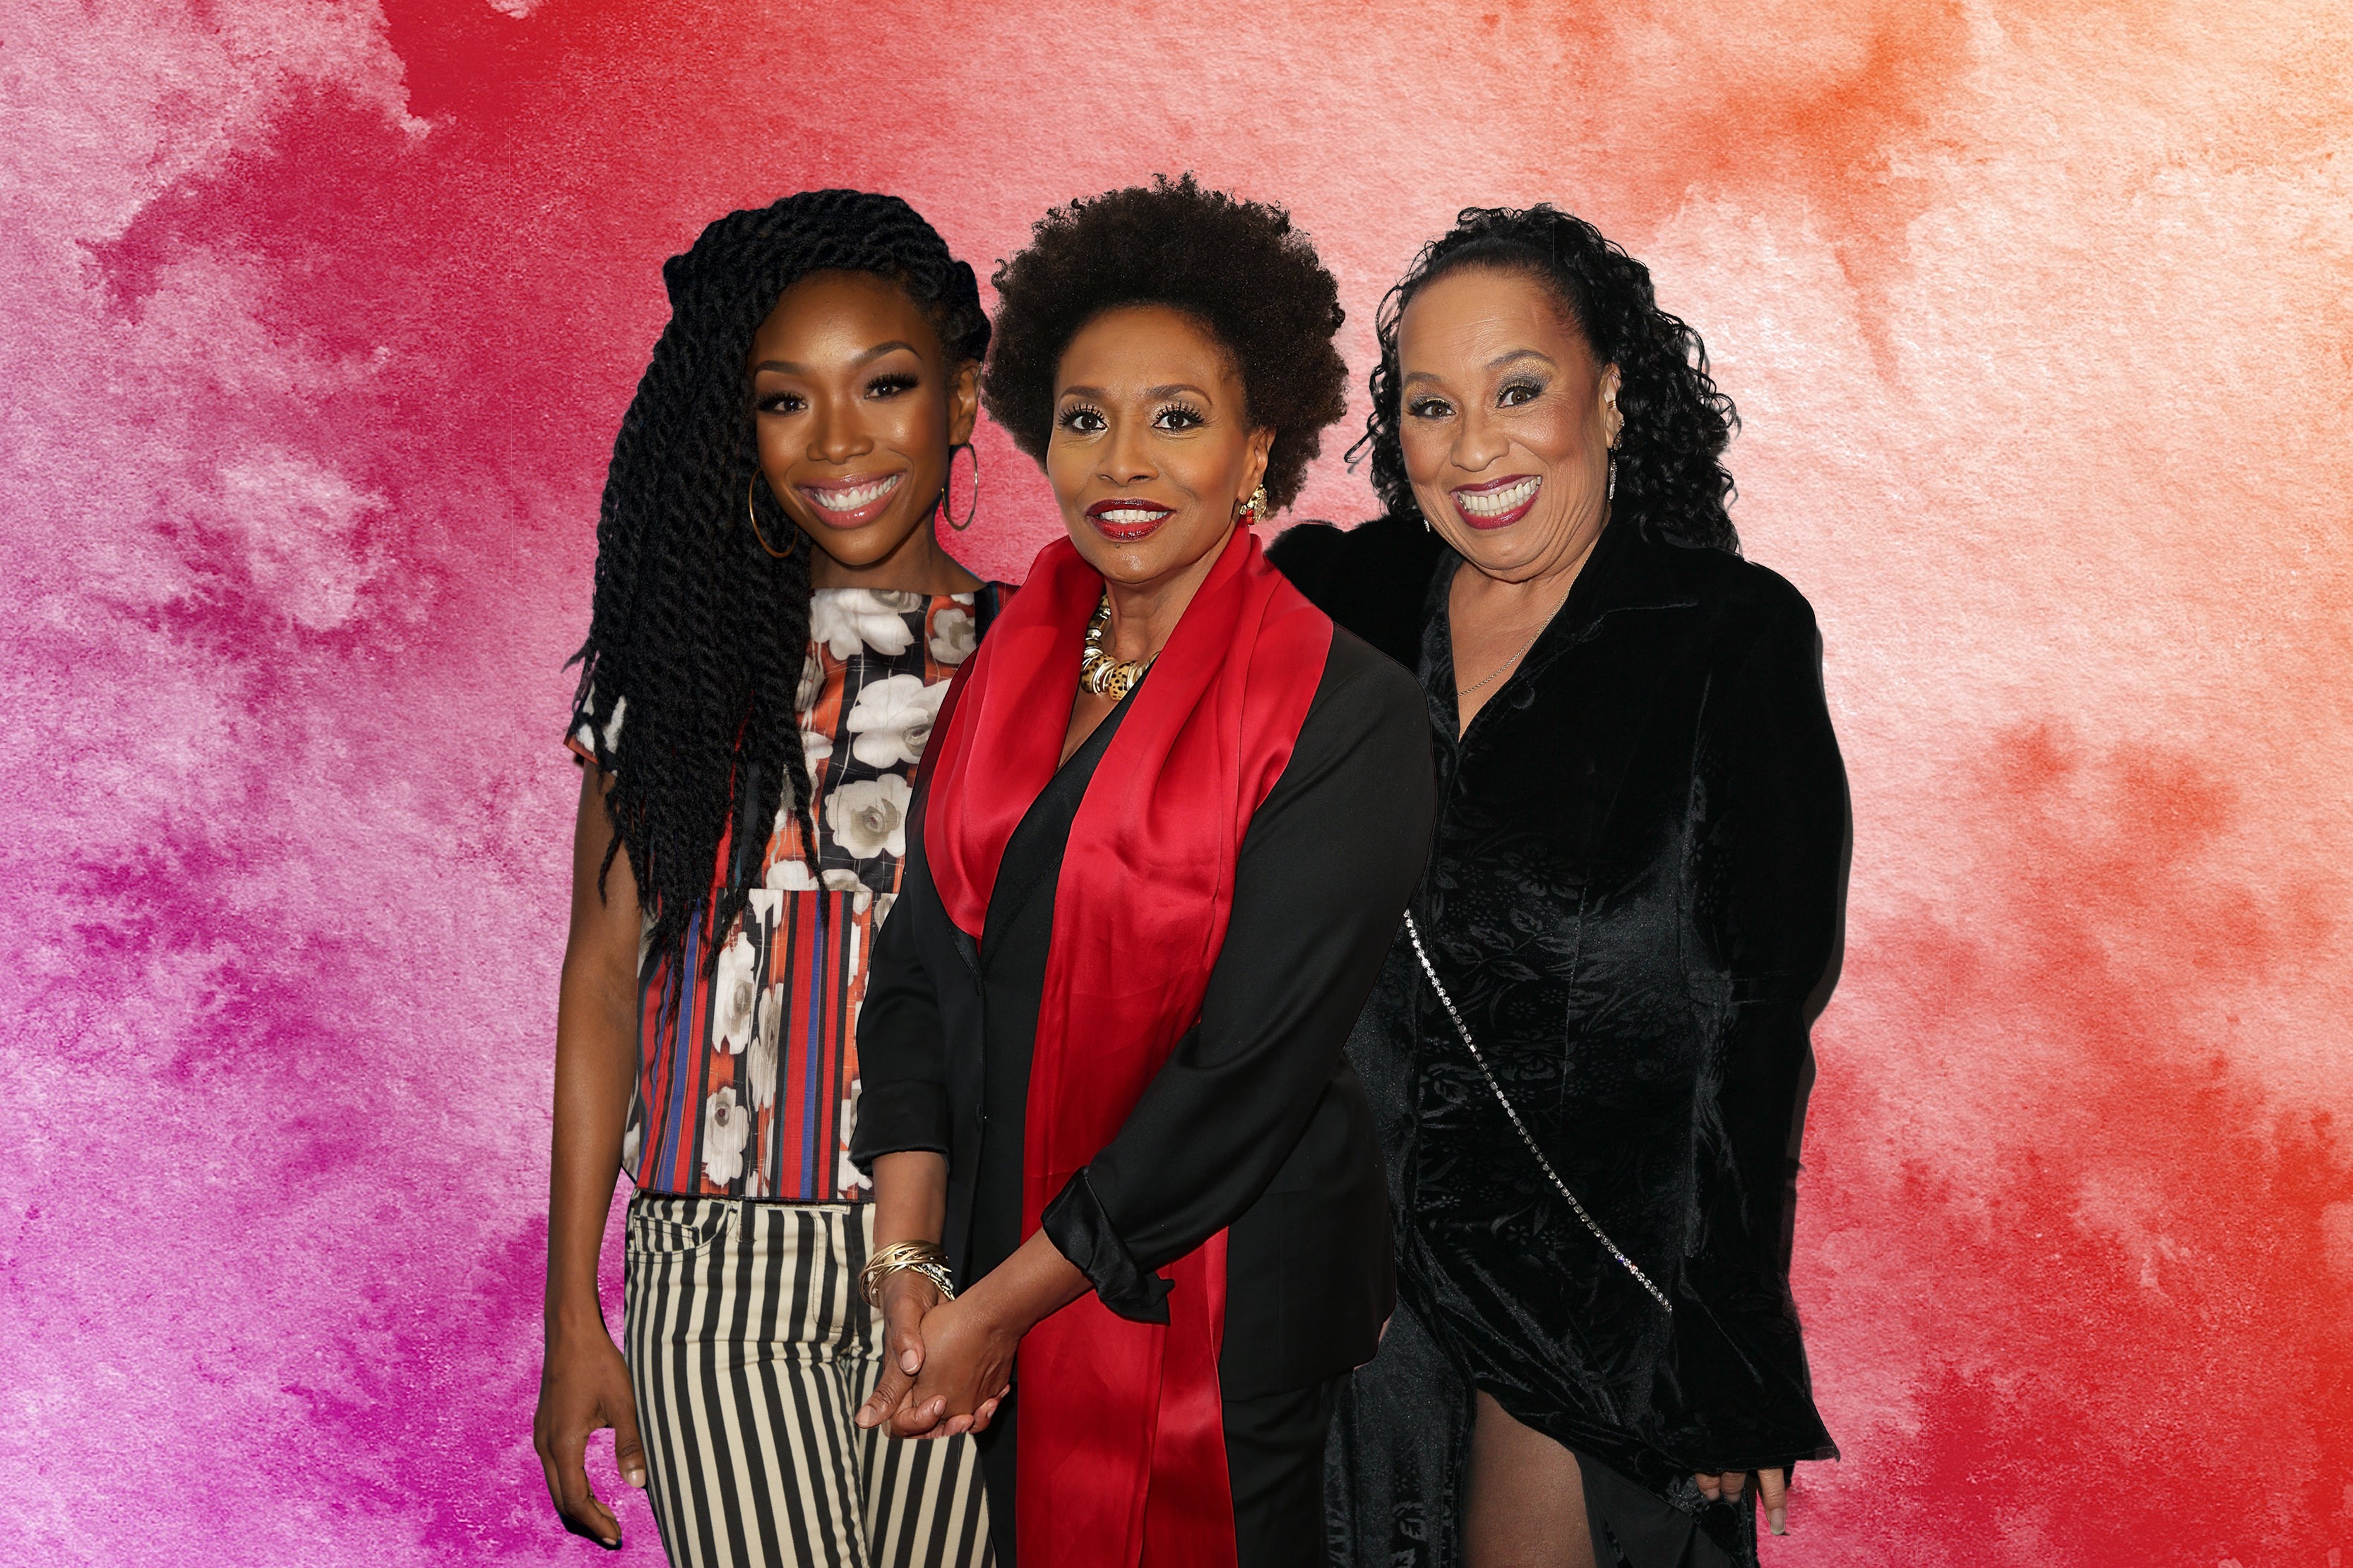 Brandy, Jenifer Lewis, And Roz Ryan Team Up Again For Protest Version Of 'In These Streets'
